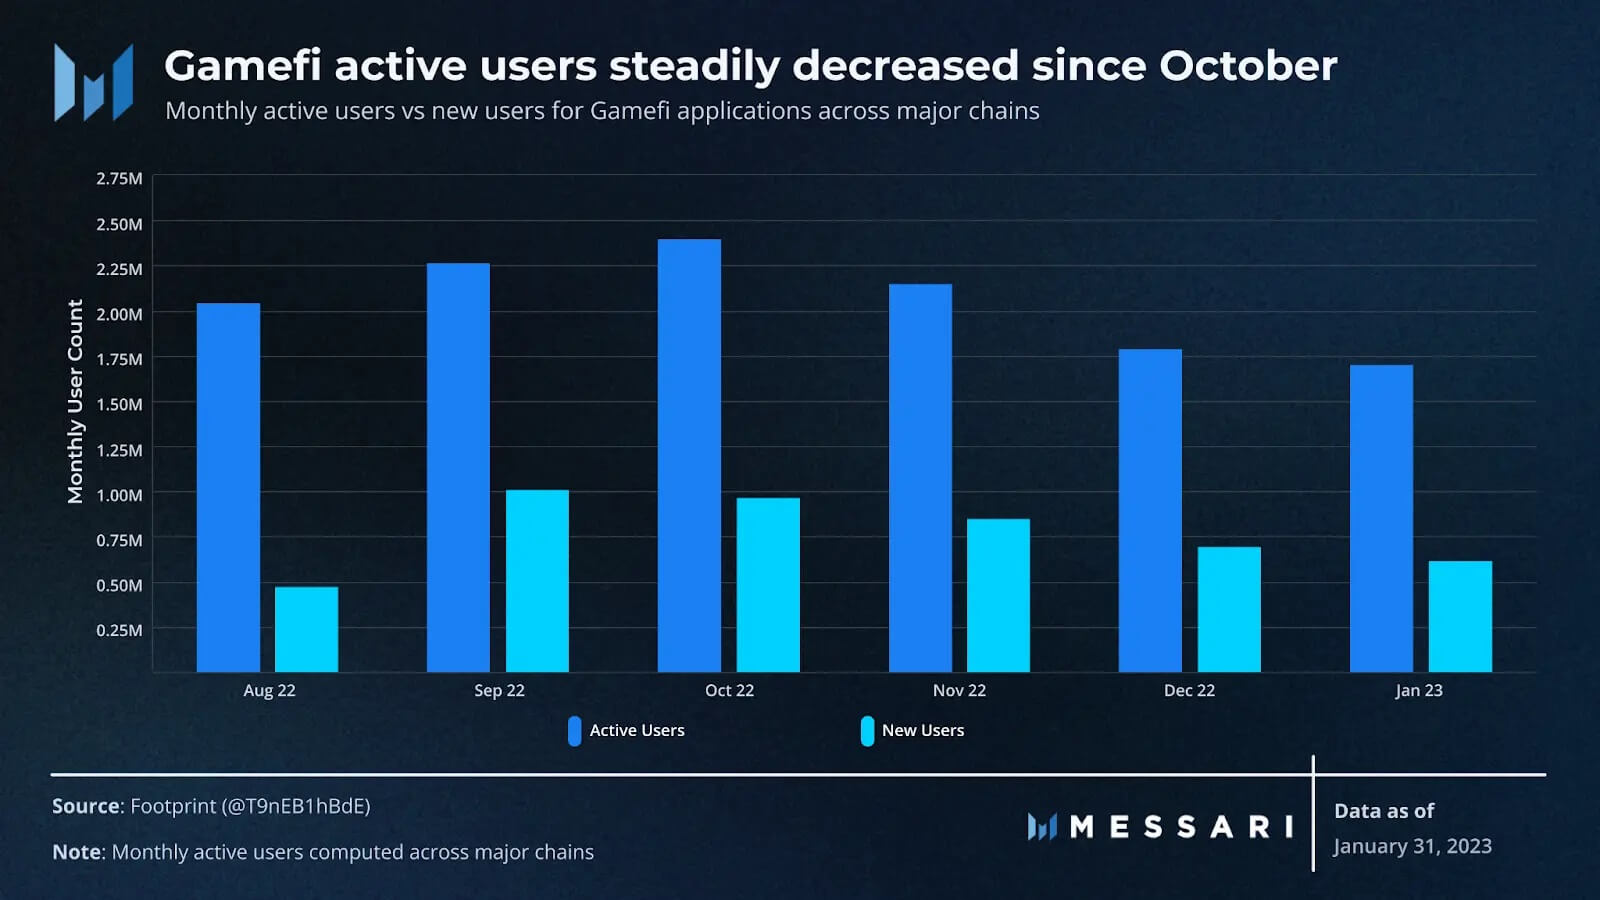 Gamefi active users have been steadily declining since October (Source: Messari Crypto)